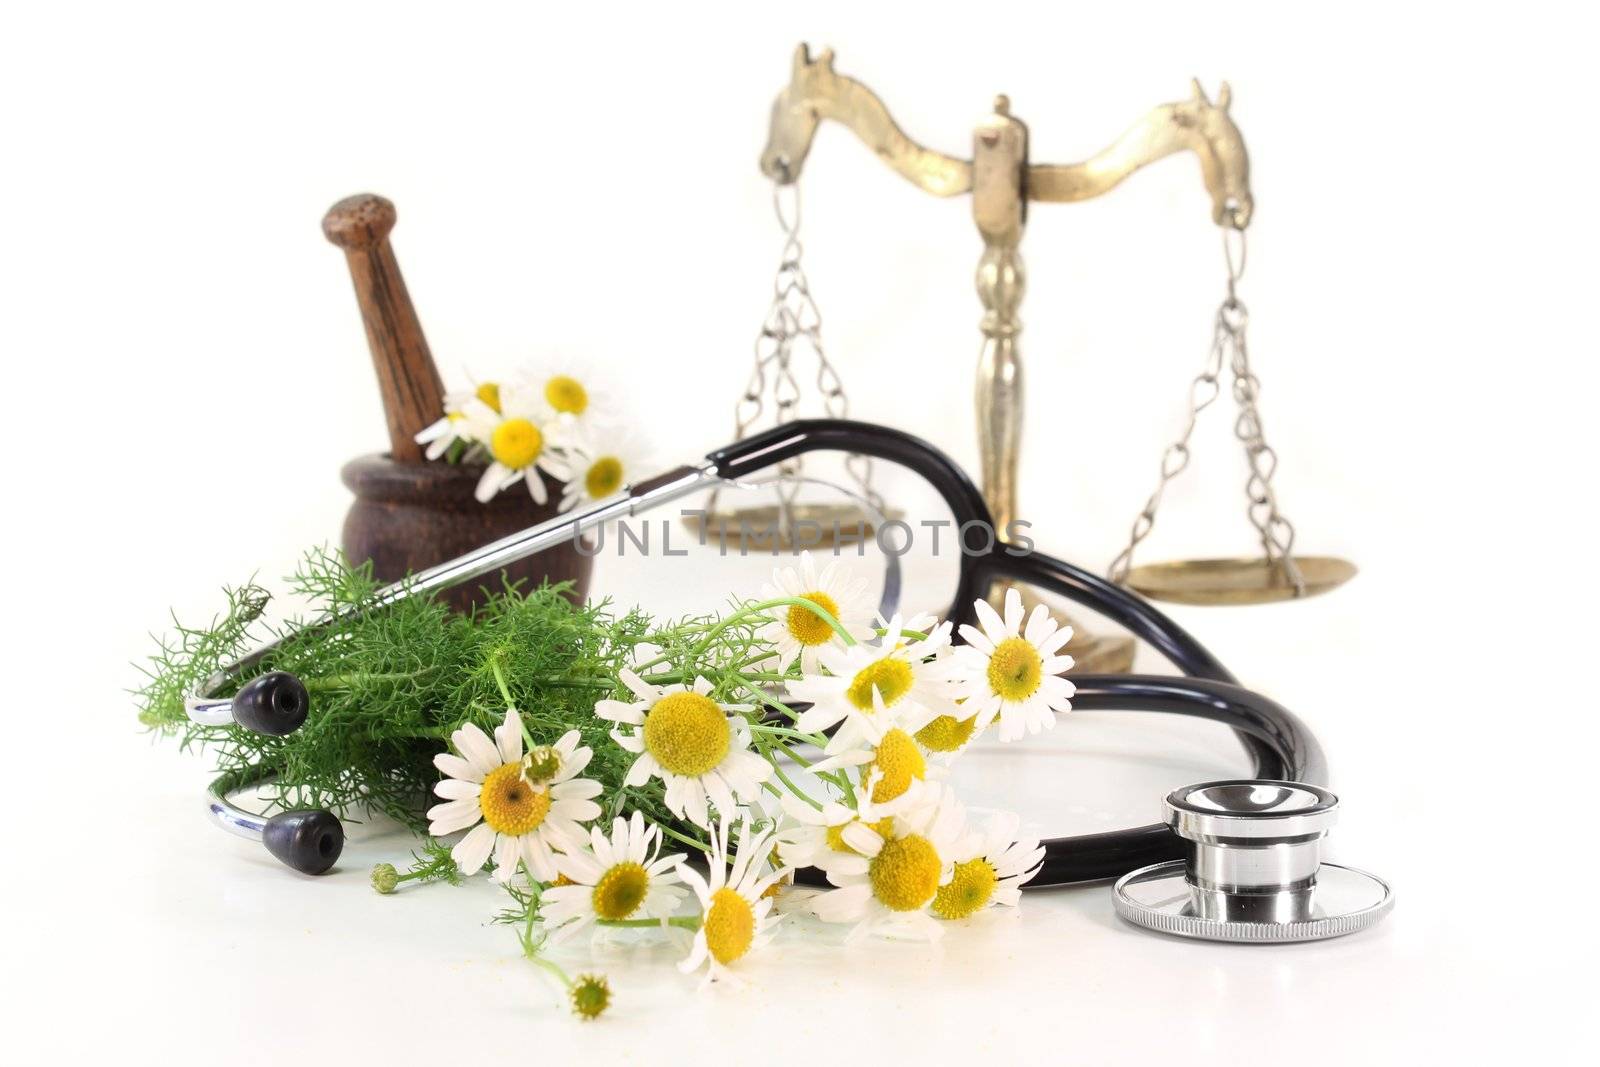 Stethoscope on a white background and chamomile
